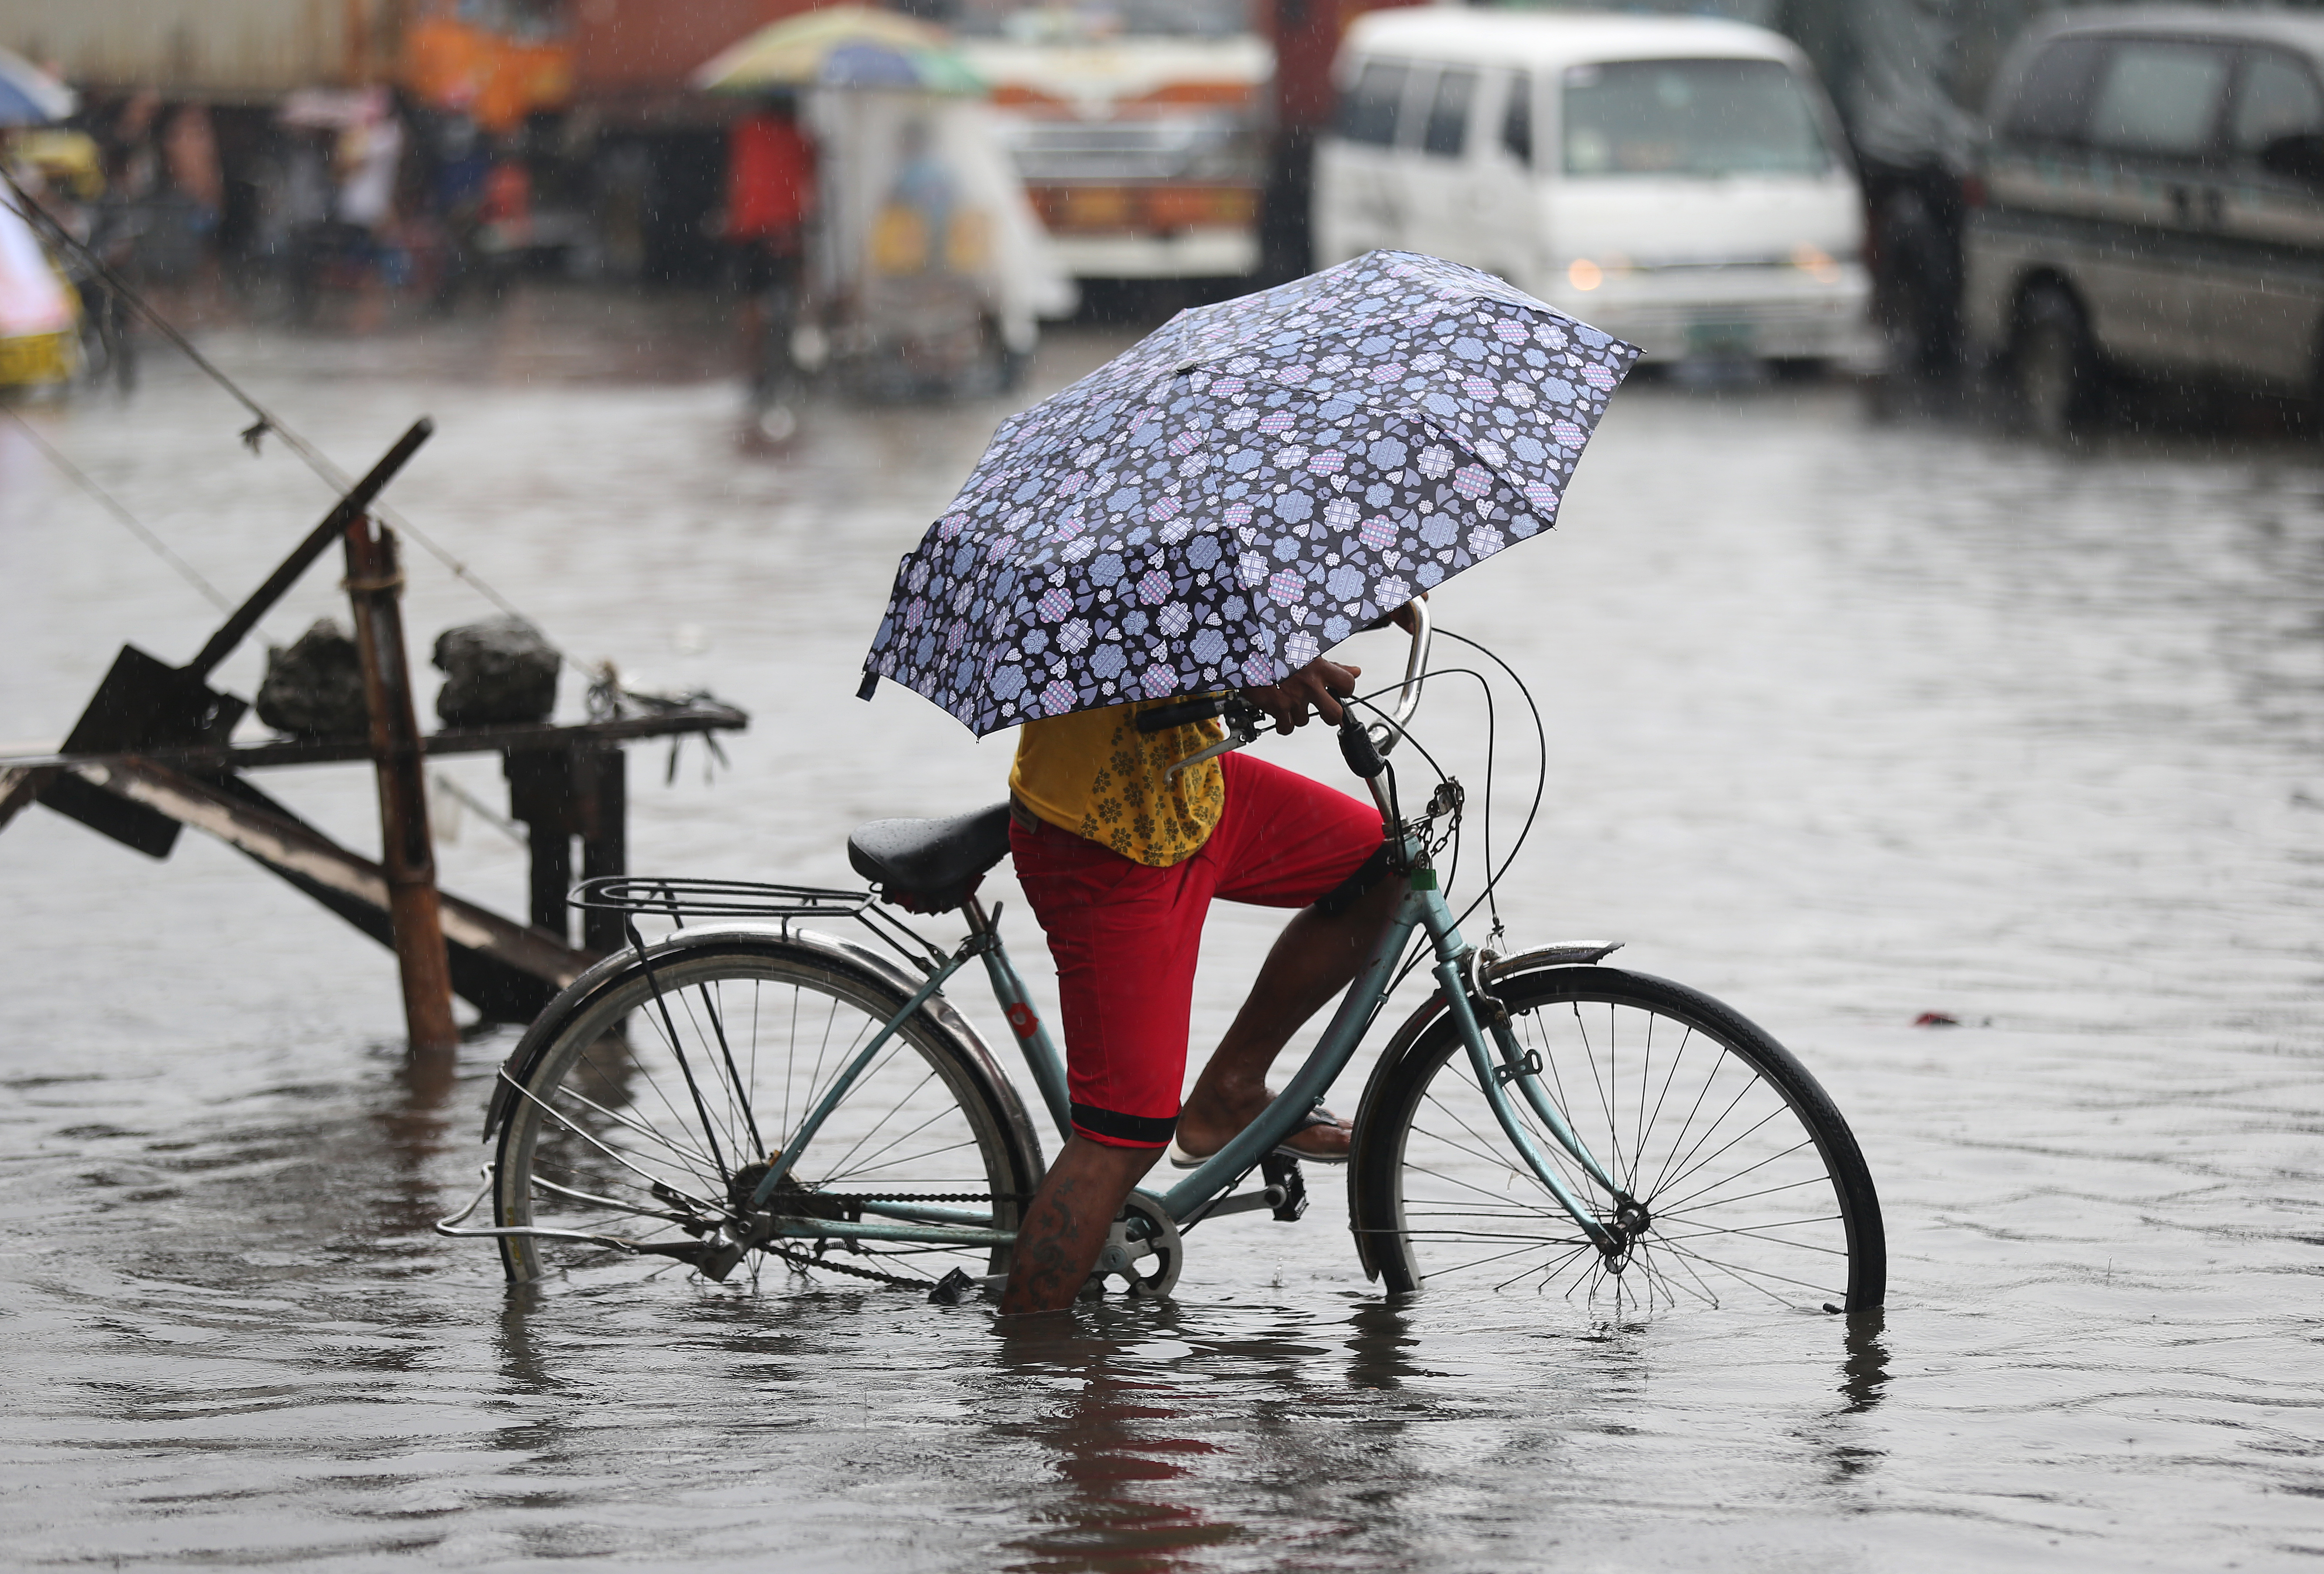 A Filipino tries to bike along a flooded street caused by heavy rains from Typhoon Melor in suburban Navotas, north of Manila, Philippines on Wednesday, Dec. 16, 2015. Photo: Reuters